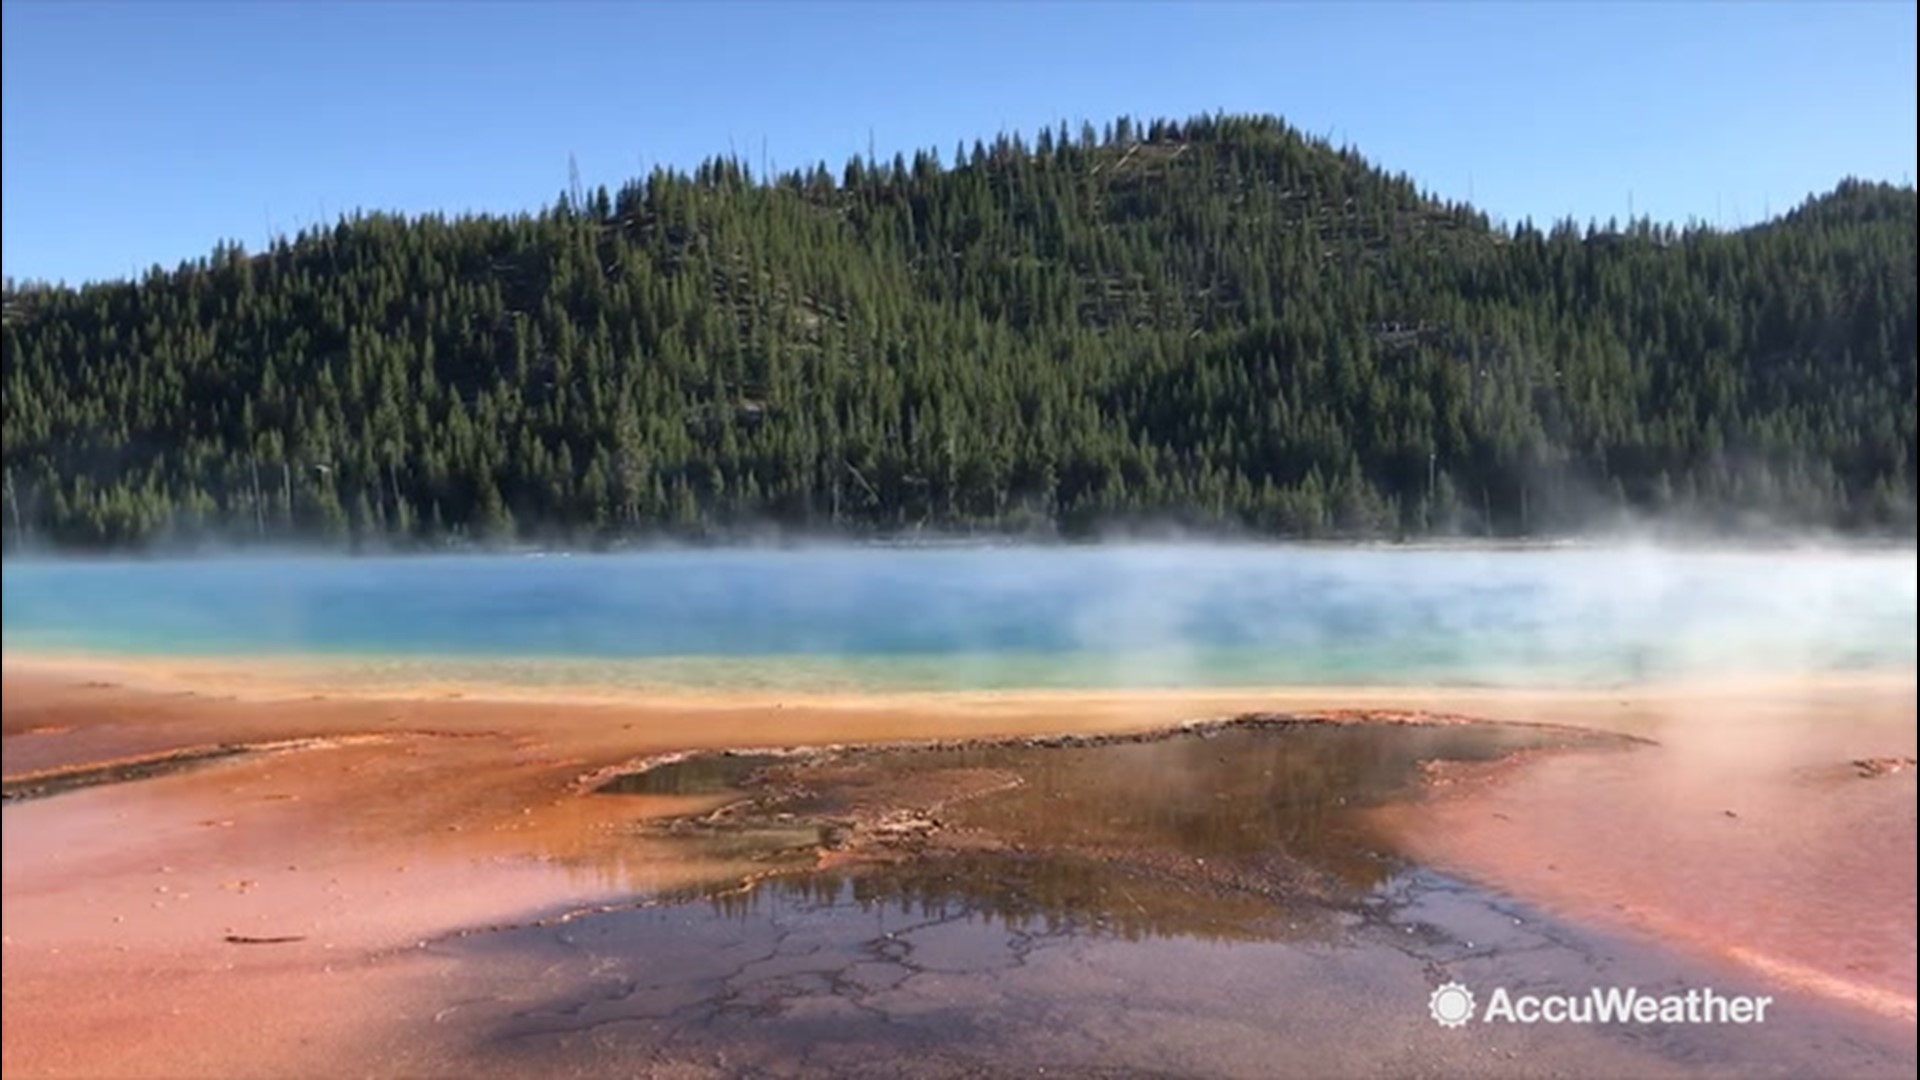 AccuWeather's #GreatAmericanRoadTrip continues as Lincoln Riddle makes his way to the famous Yellowstone National Park, the worlds first national park, in Wyoming on July 21.